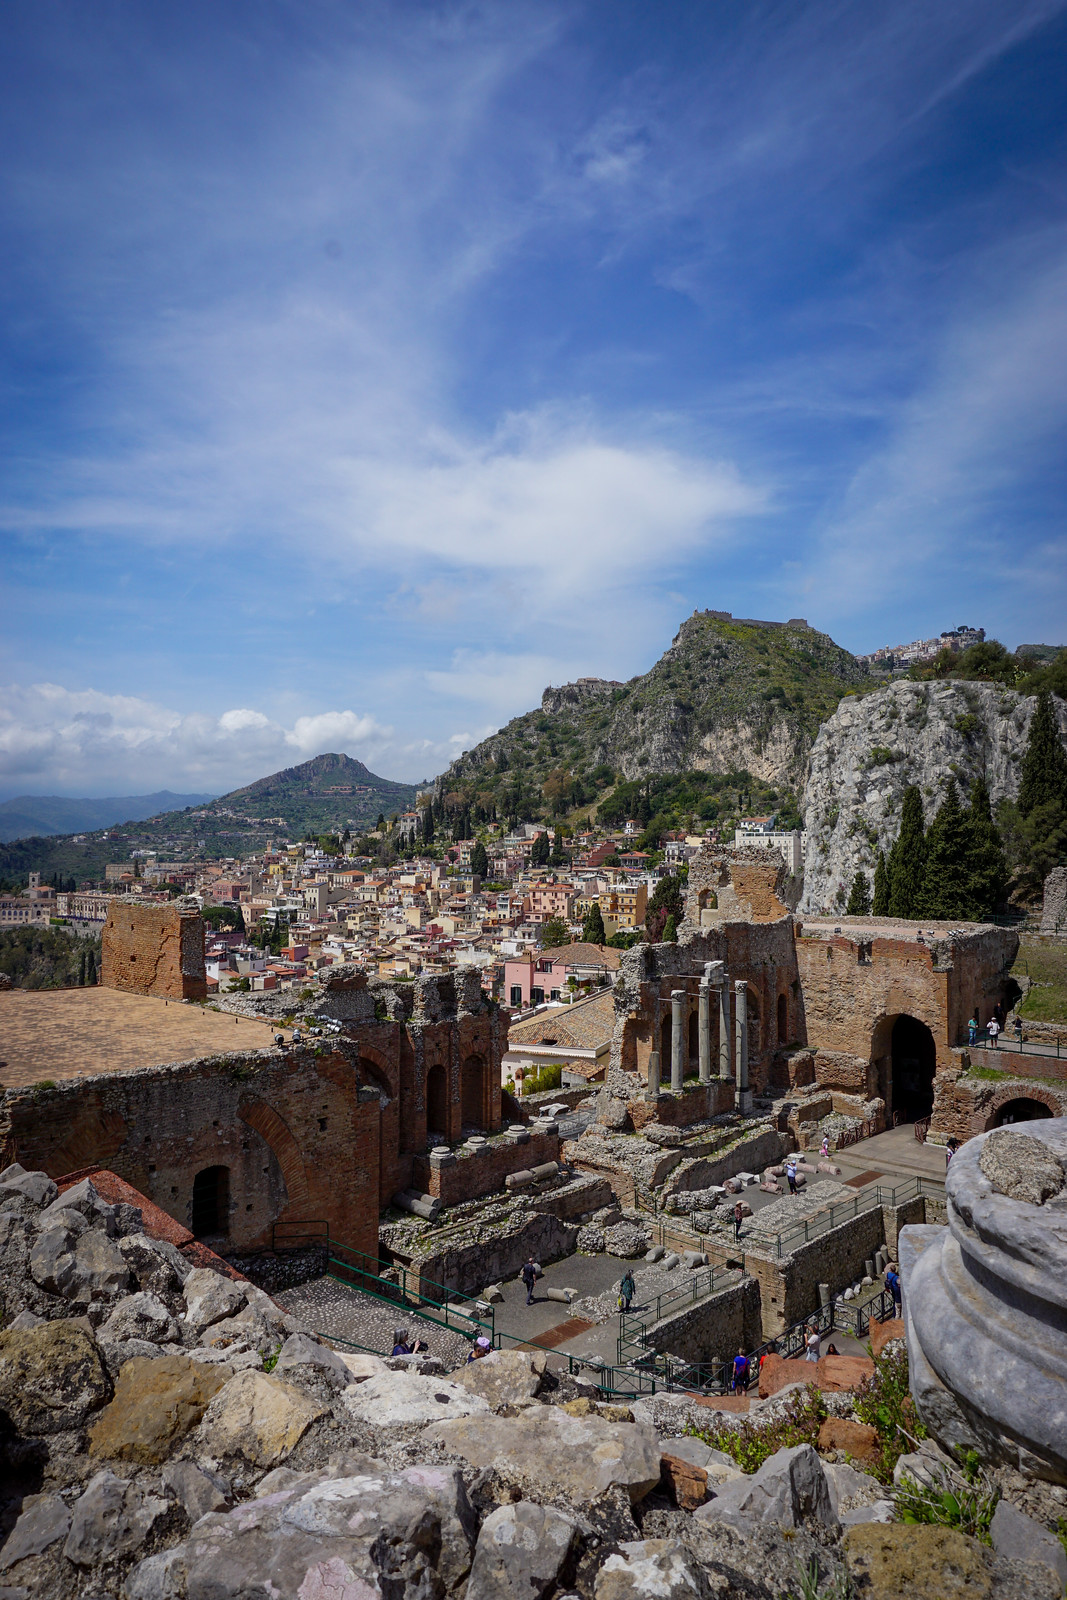 Taormina, Sicily Travel Guide | What to See, Do and Eat in Taormina | Where to stay in Taormina | Discover the Best Things to do in Taormina, Sicily, Italy | Visit Sicily | Sicily Food | Sicily Travel Tips